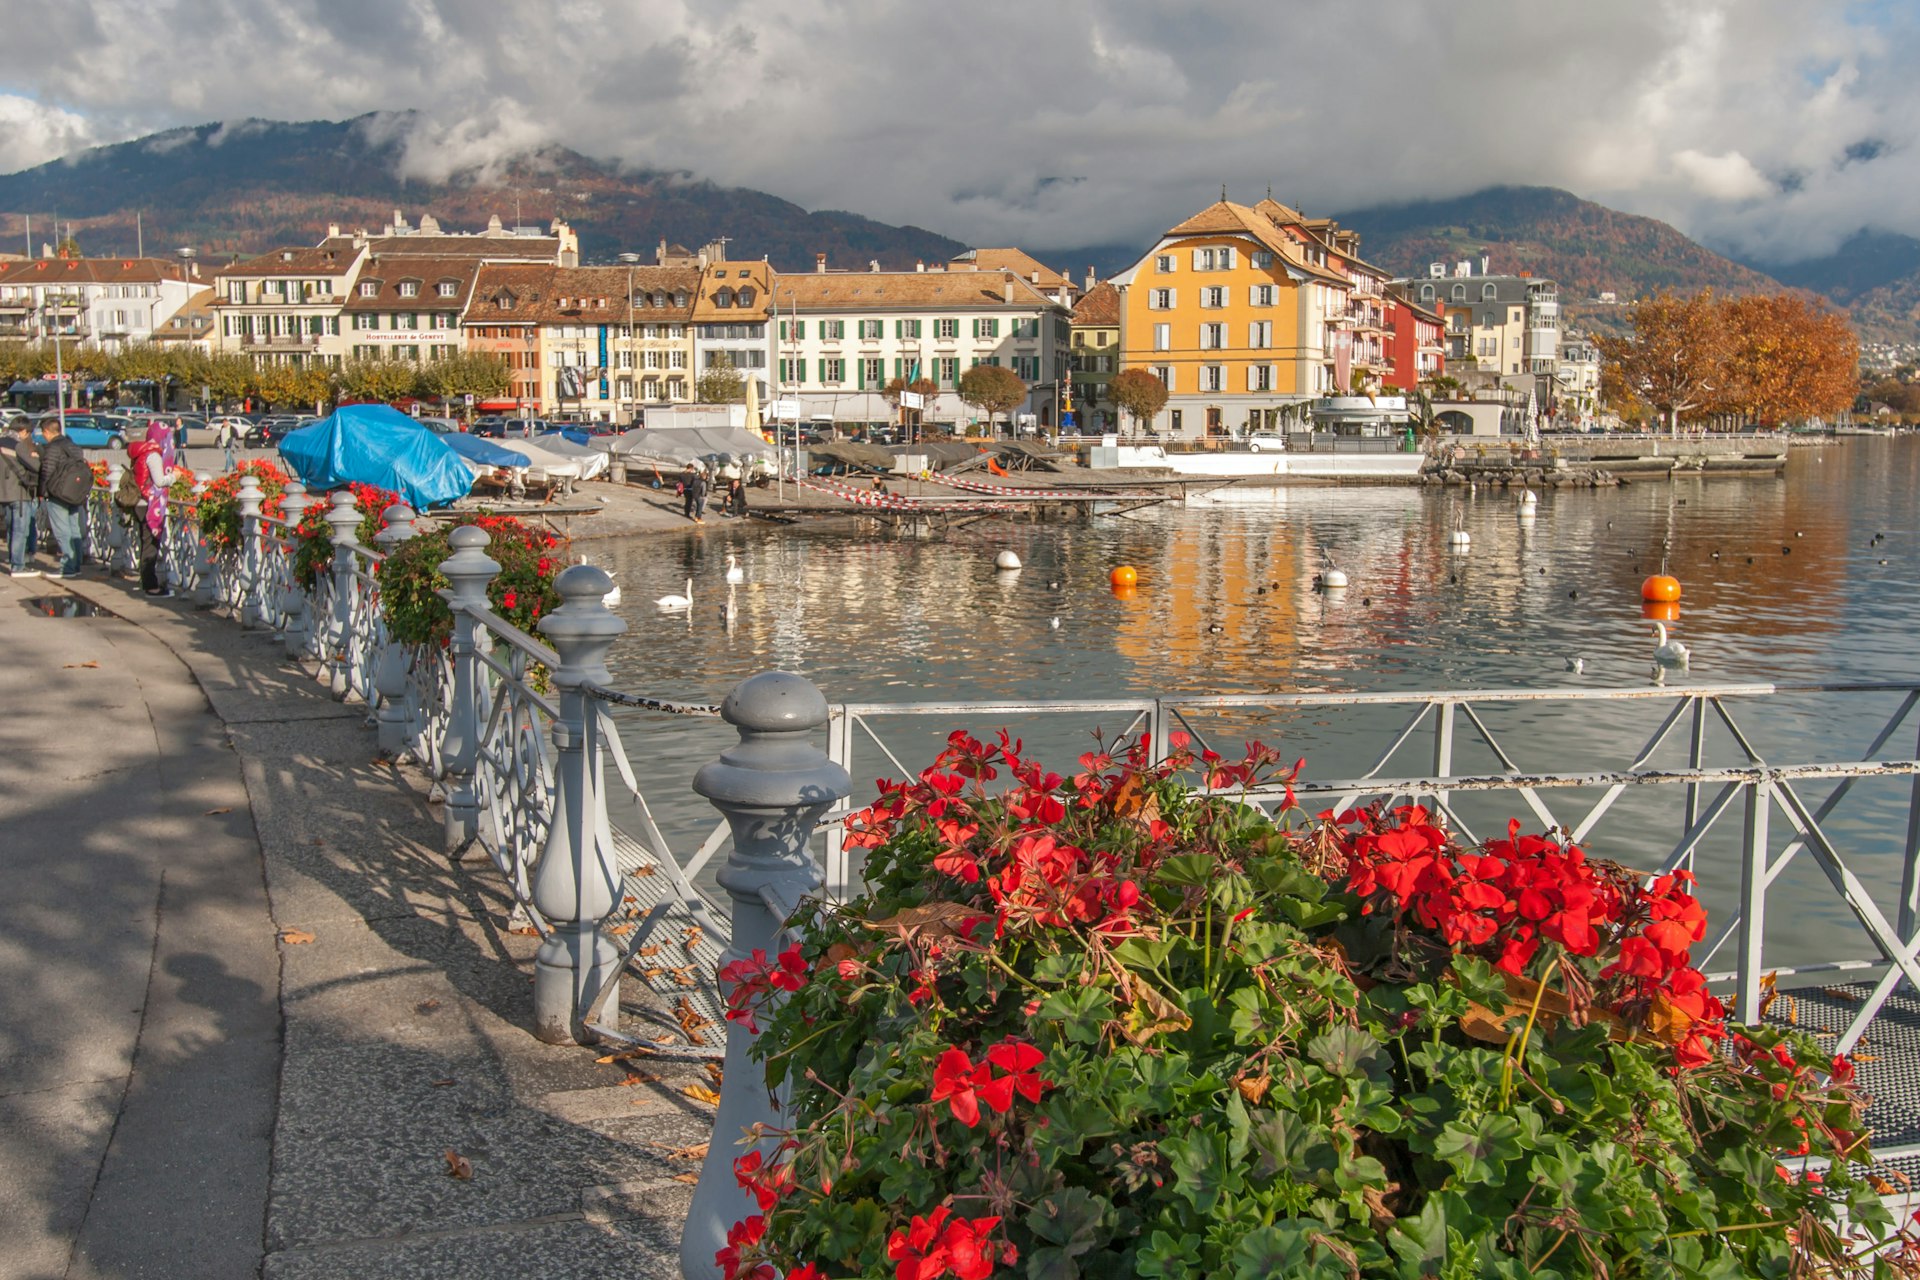  The town of Vevey and Lake Geneva.